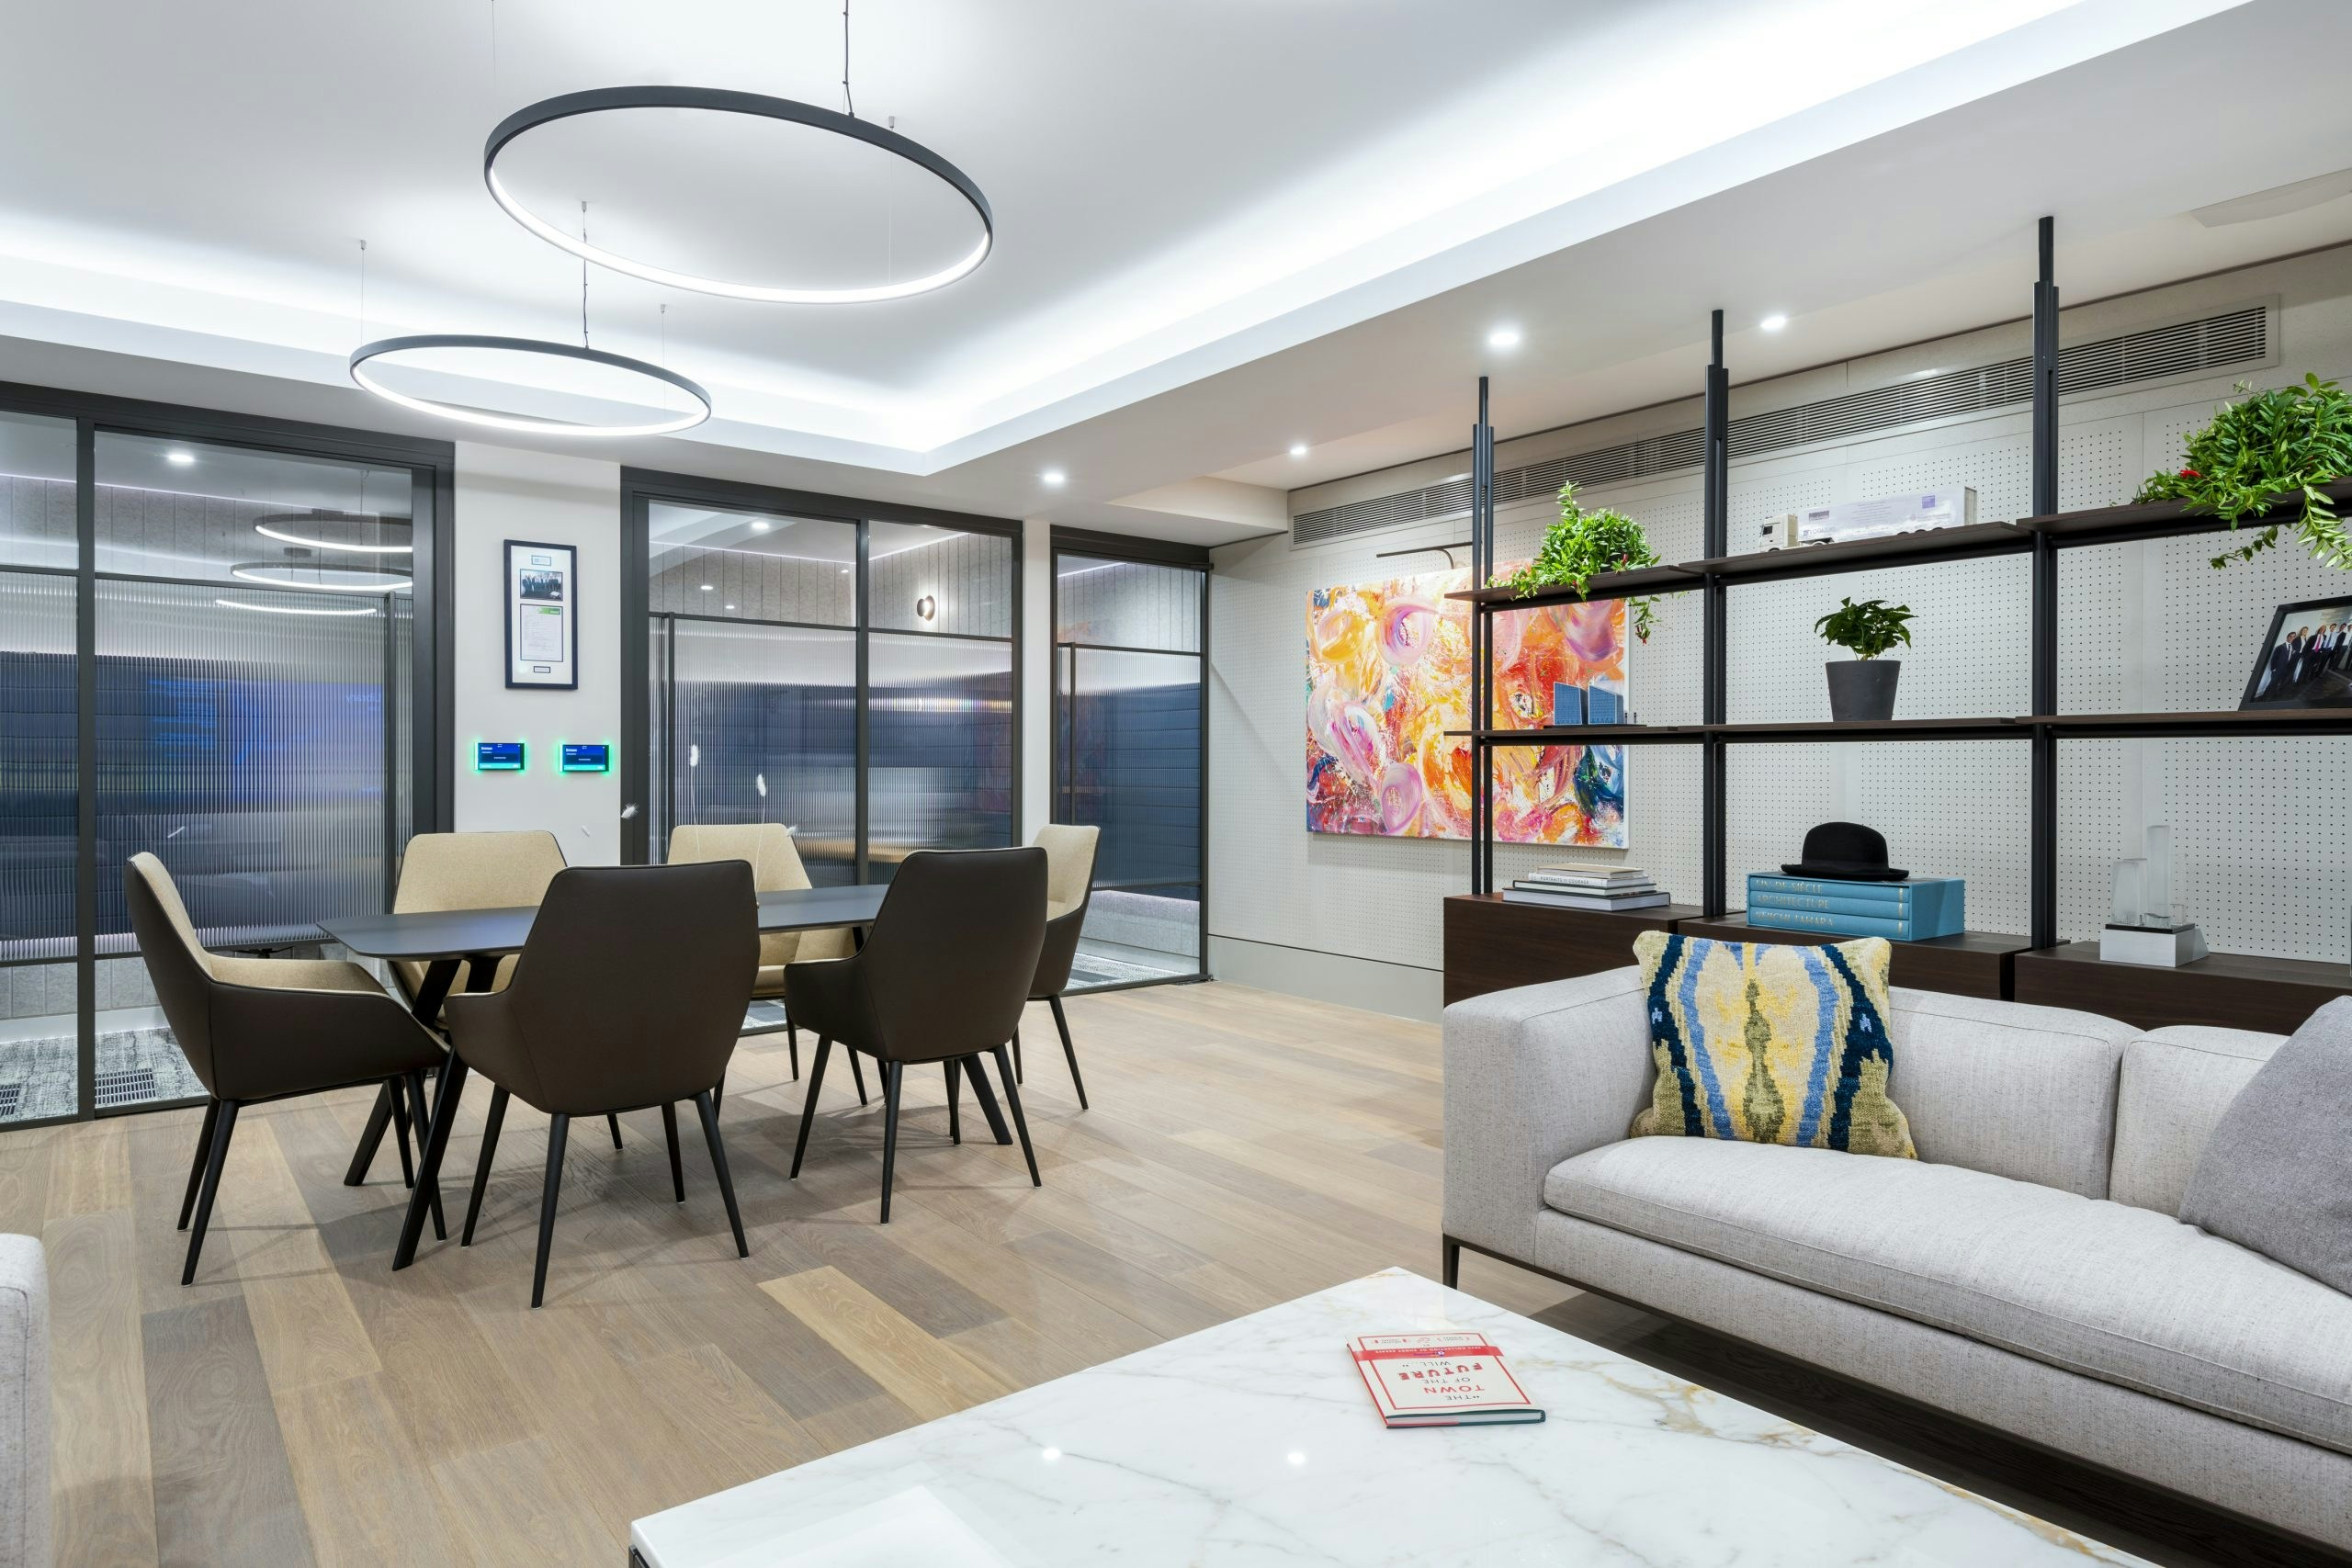 Law Firm Office Design - Current and Future Trends